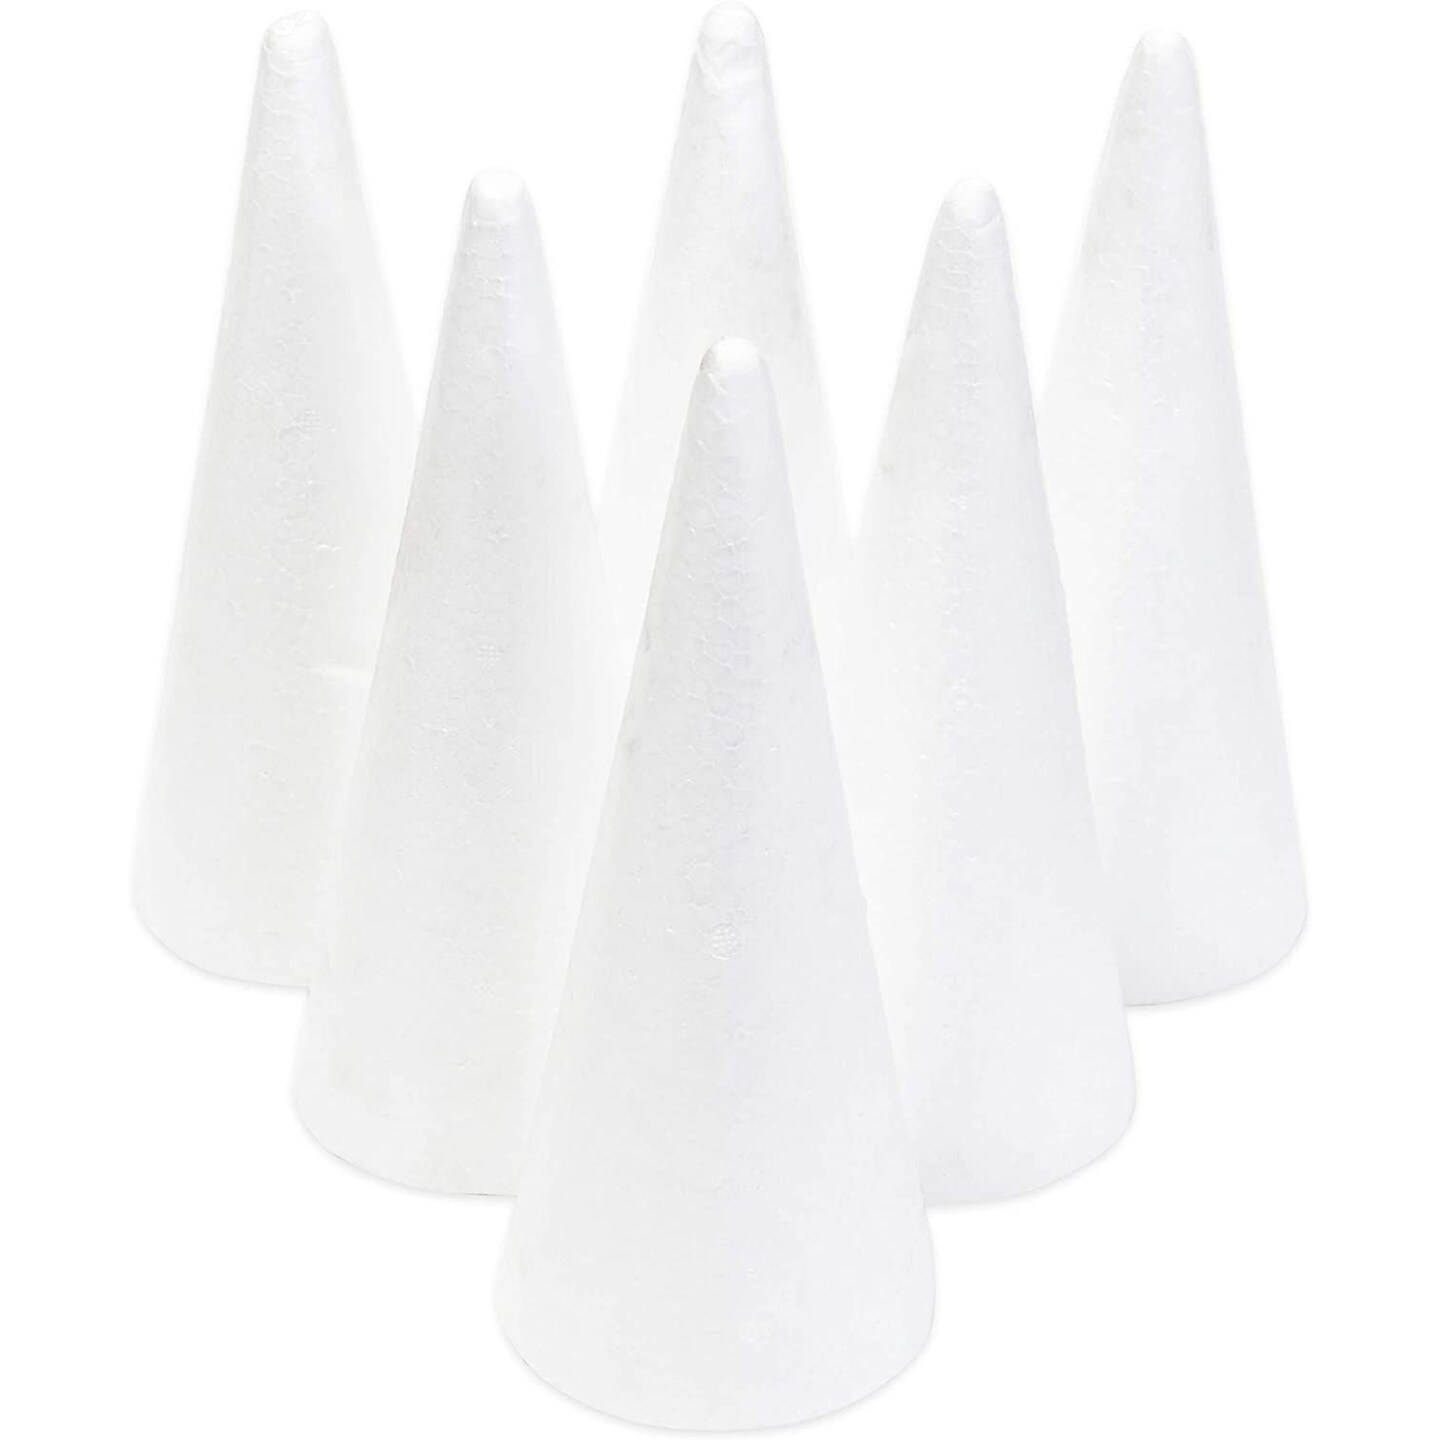 6 Pack Foam Cones for Crafts, DIY Art Projects, Handmade Gnomes, Trees,  Holiday Decorations (3.8 x 9.5 in)